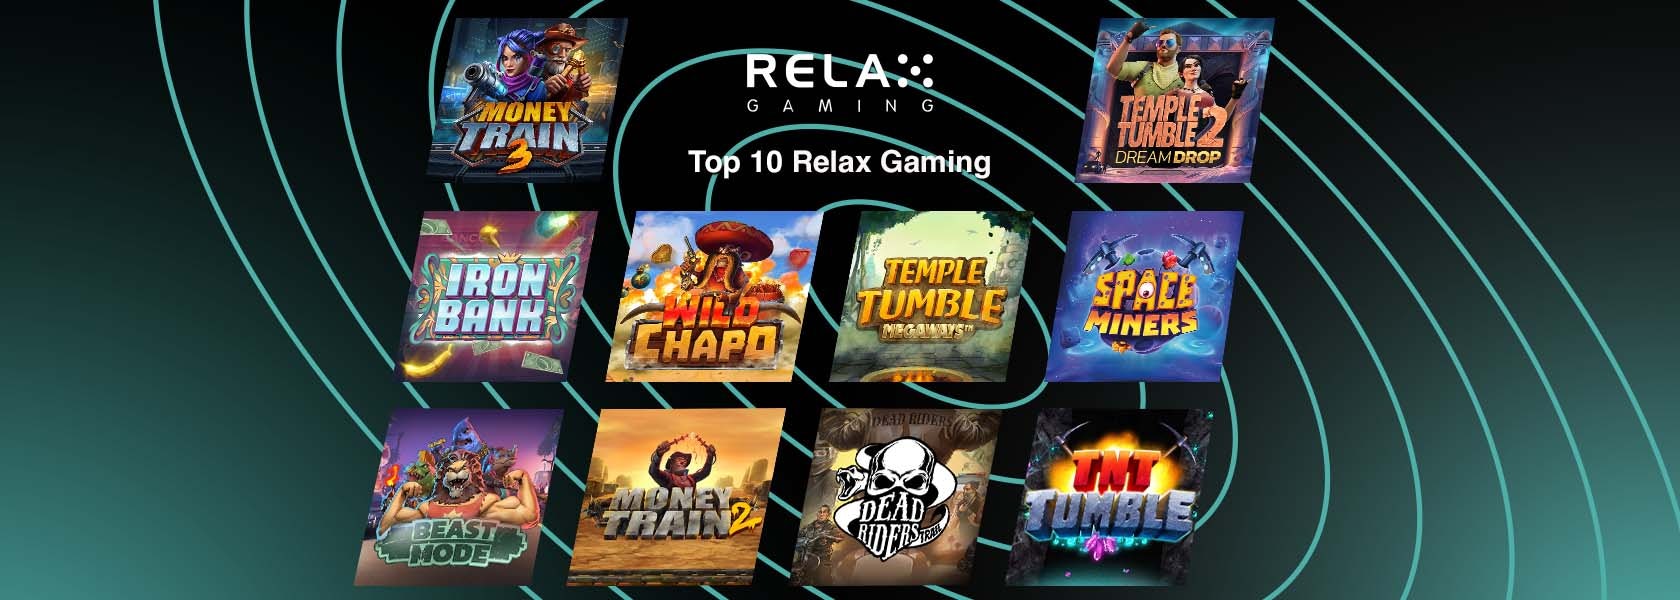 relax-gaming-top 10-1680x600